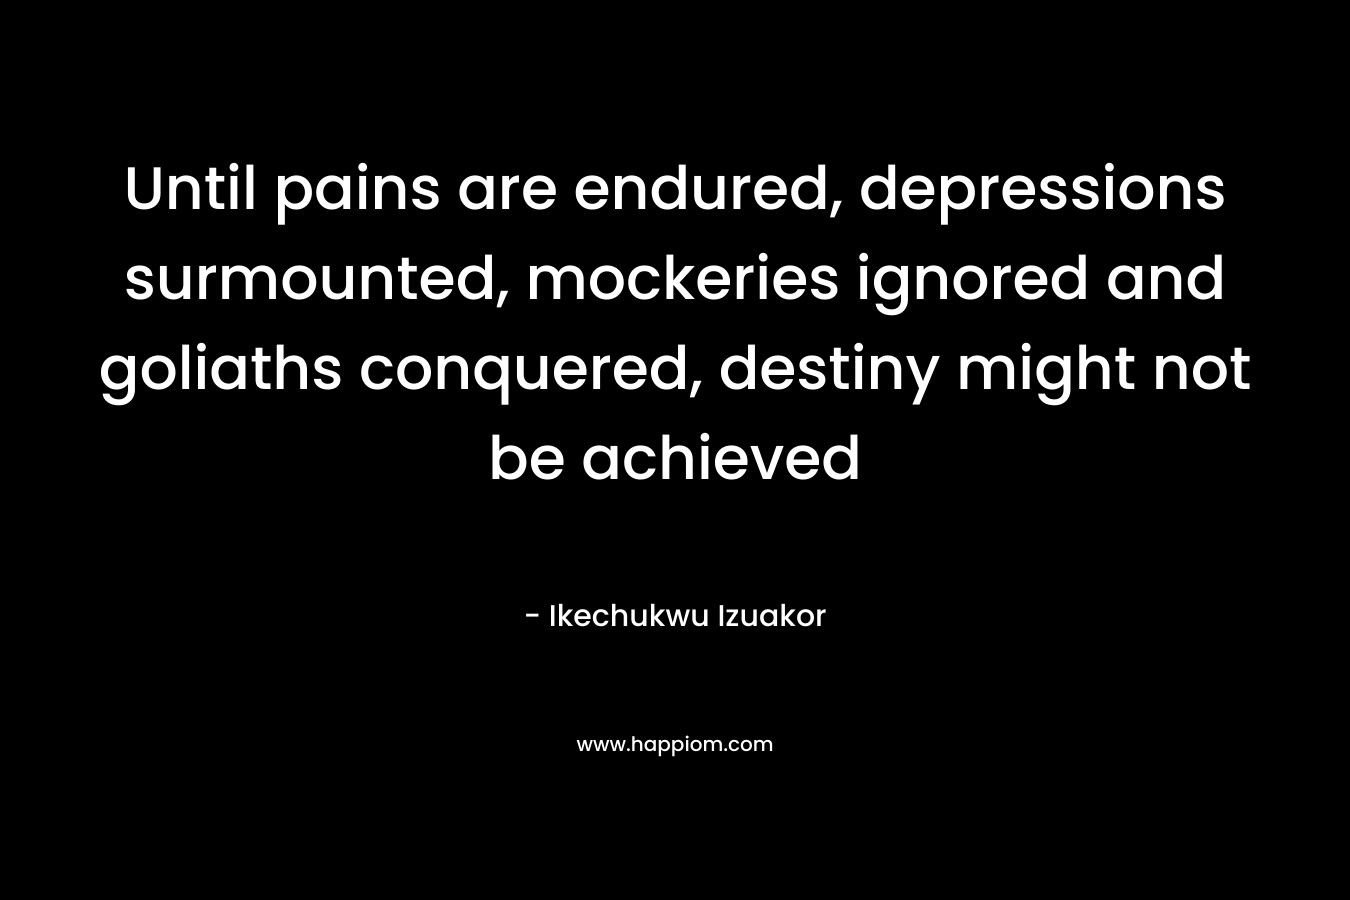 Until pains are endured, depressions surmounted, mockeries ignored and goliaths conquered, destiny might not be achieved – Ikechukwu Izuakor